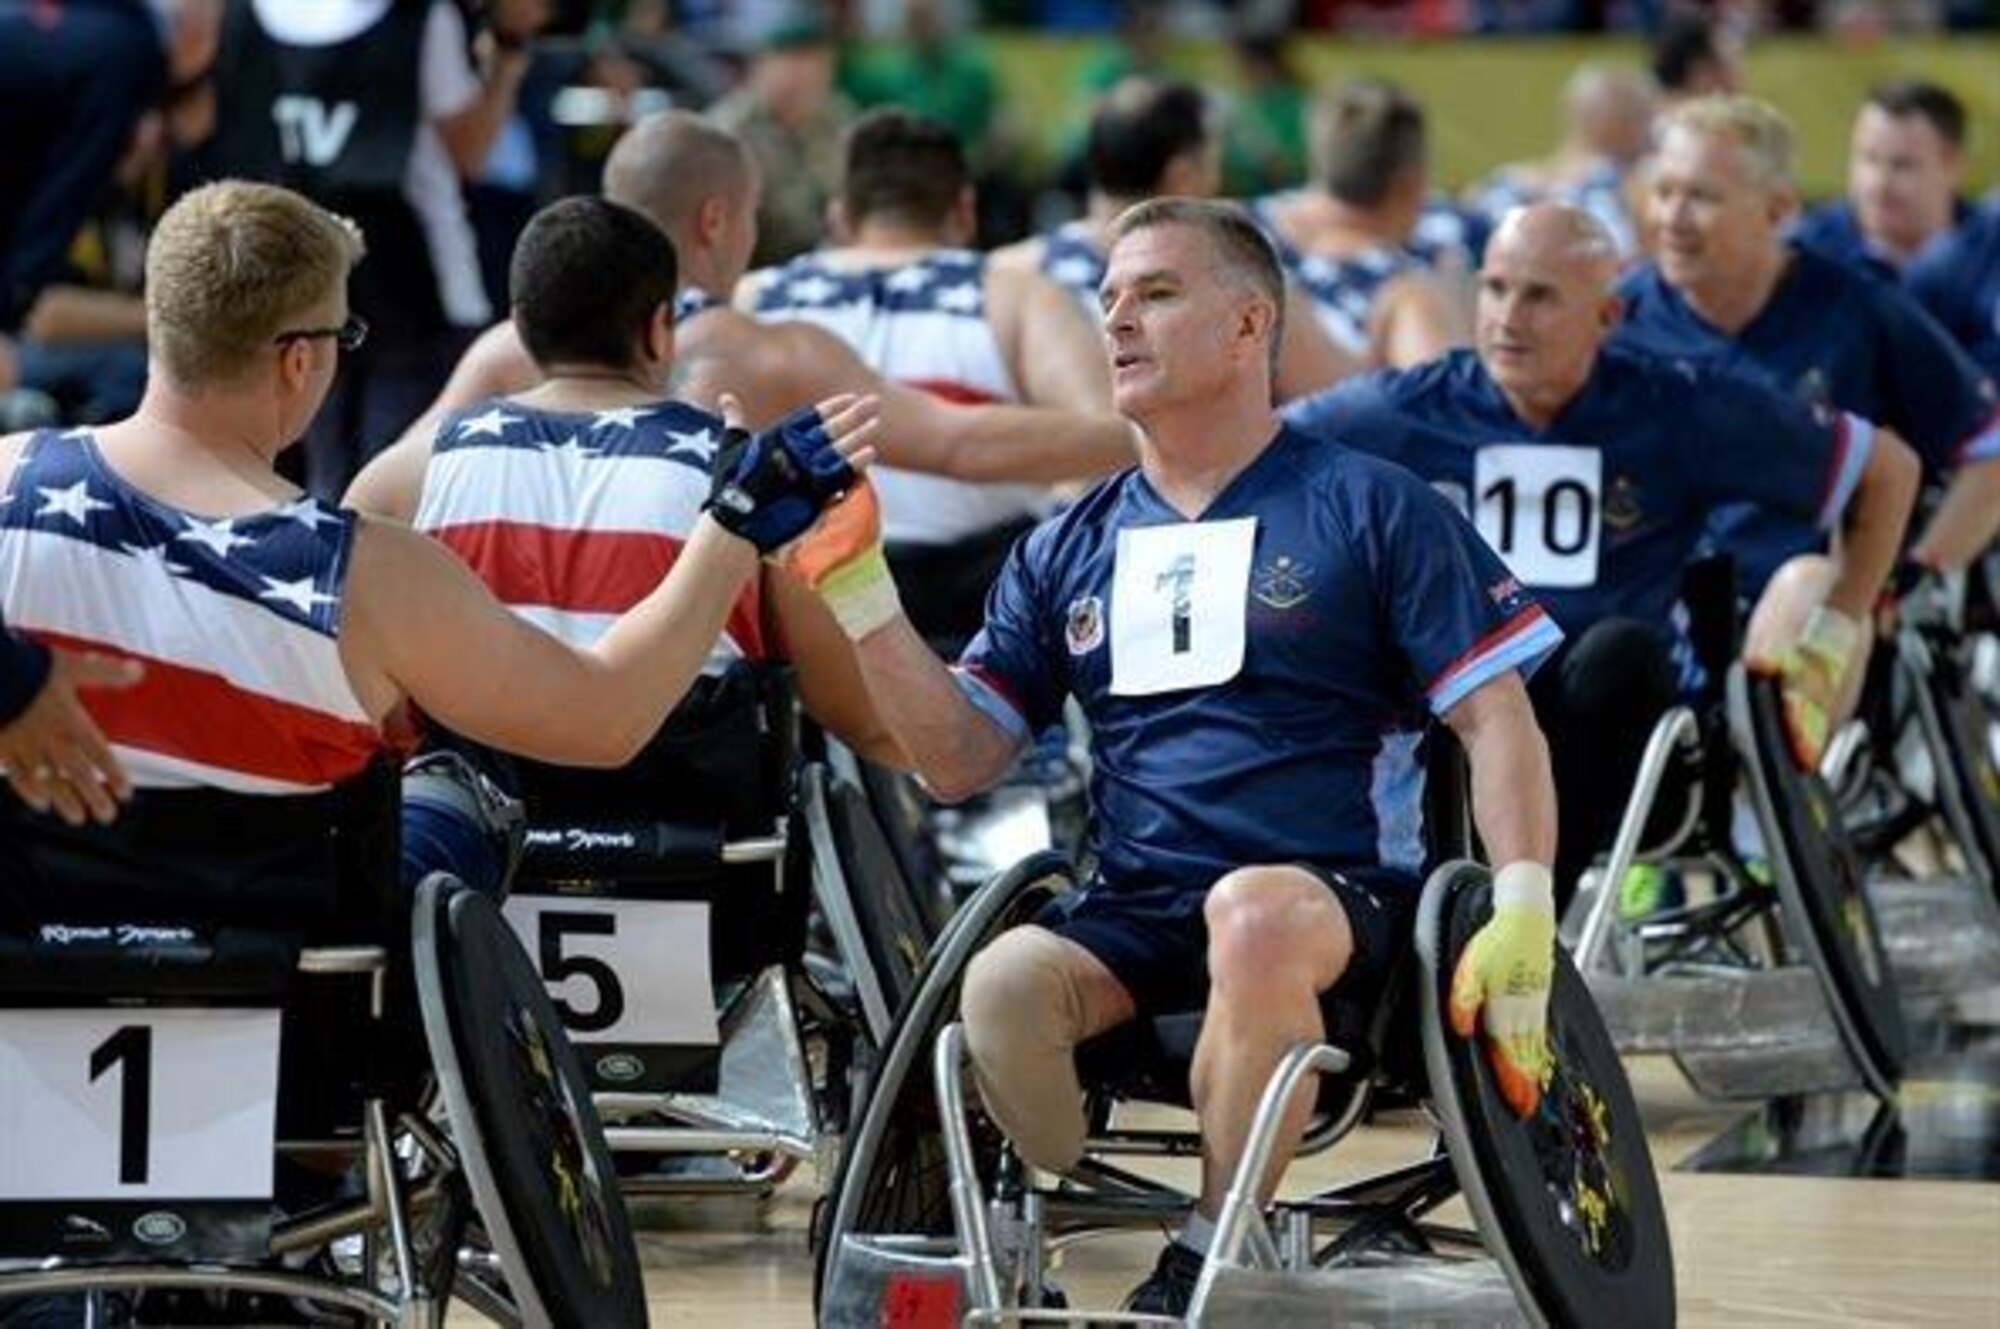 Members of the American and Australian wheelchair rugby teams congratulate each other after the U.S’s 14-4 victory over Australia Sept. 12, 2014, at the 2014 Invictus Games in London. Invictus Games is an international competition that brings together wounded, injured and ill service members in the spirit of friendly athletic competition. American Soldiers, Sailors, Airmen and Marines are representing the U.S. in the competition which is taking place Sept. 10-14. (U.S. Navy photo/Mass Communication Specialist 2nd Class Joshua D. Sheppard